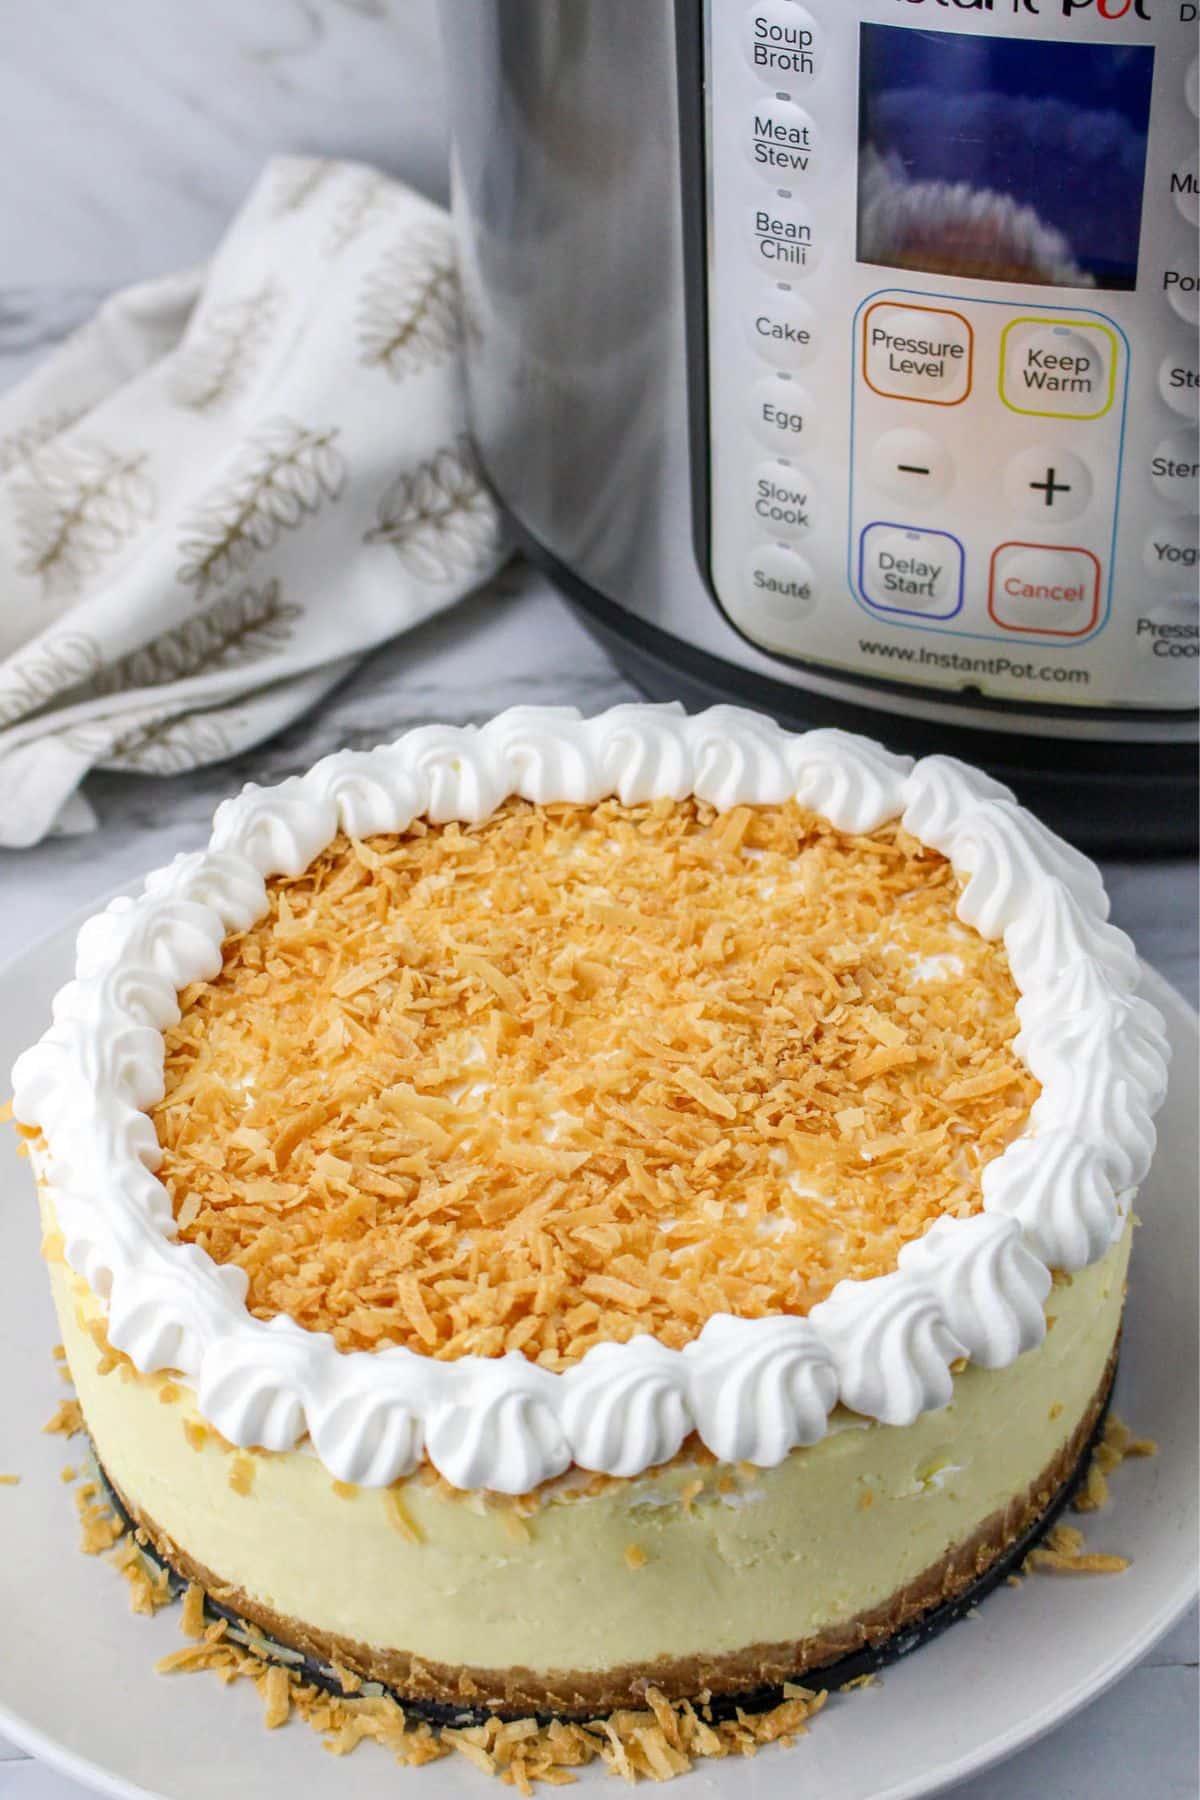 whole uncut cheesecake on a white plate with a pressure cooker in the background